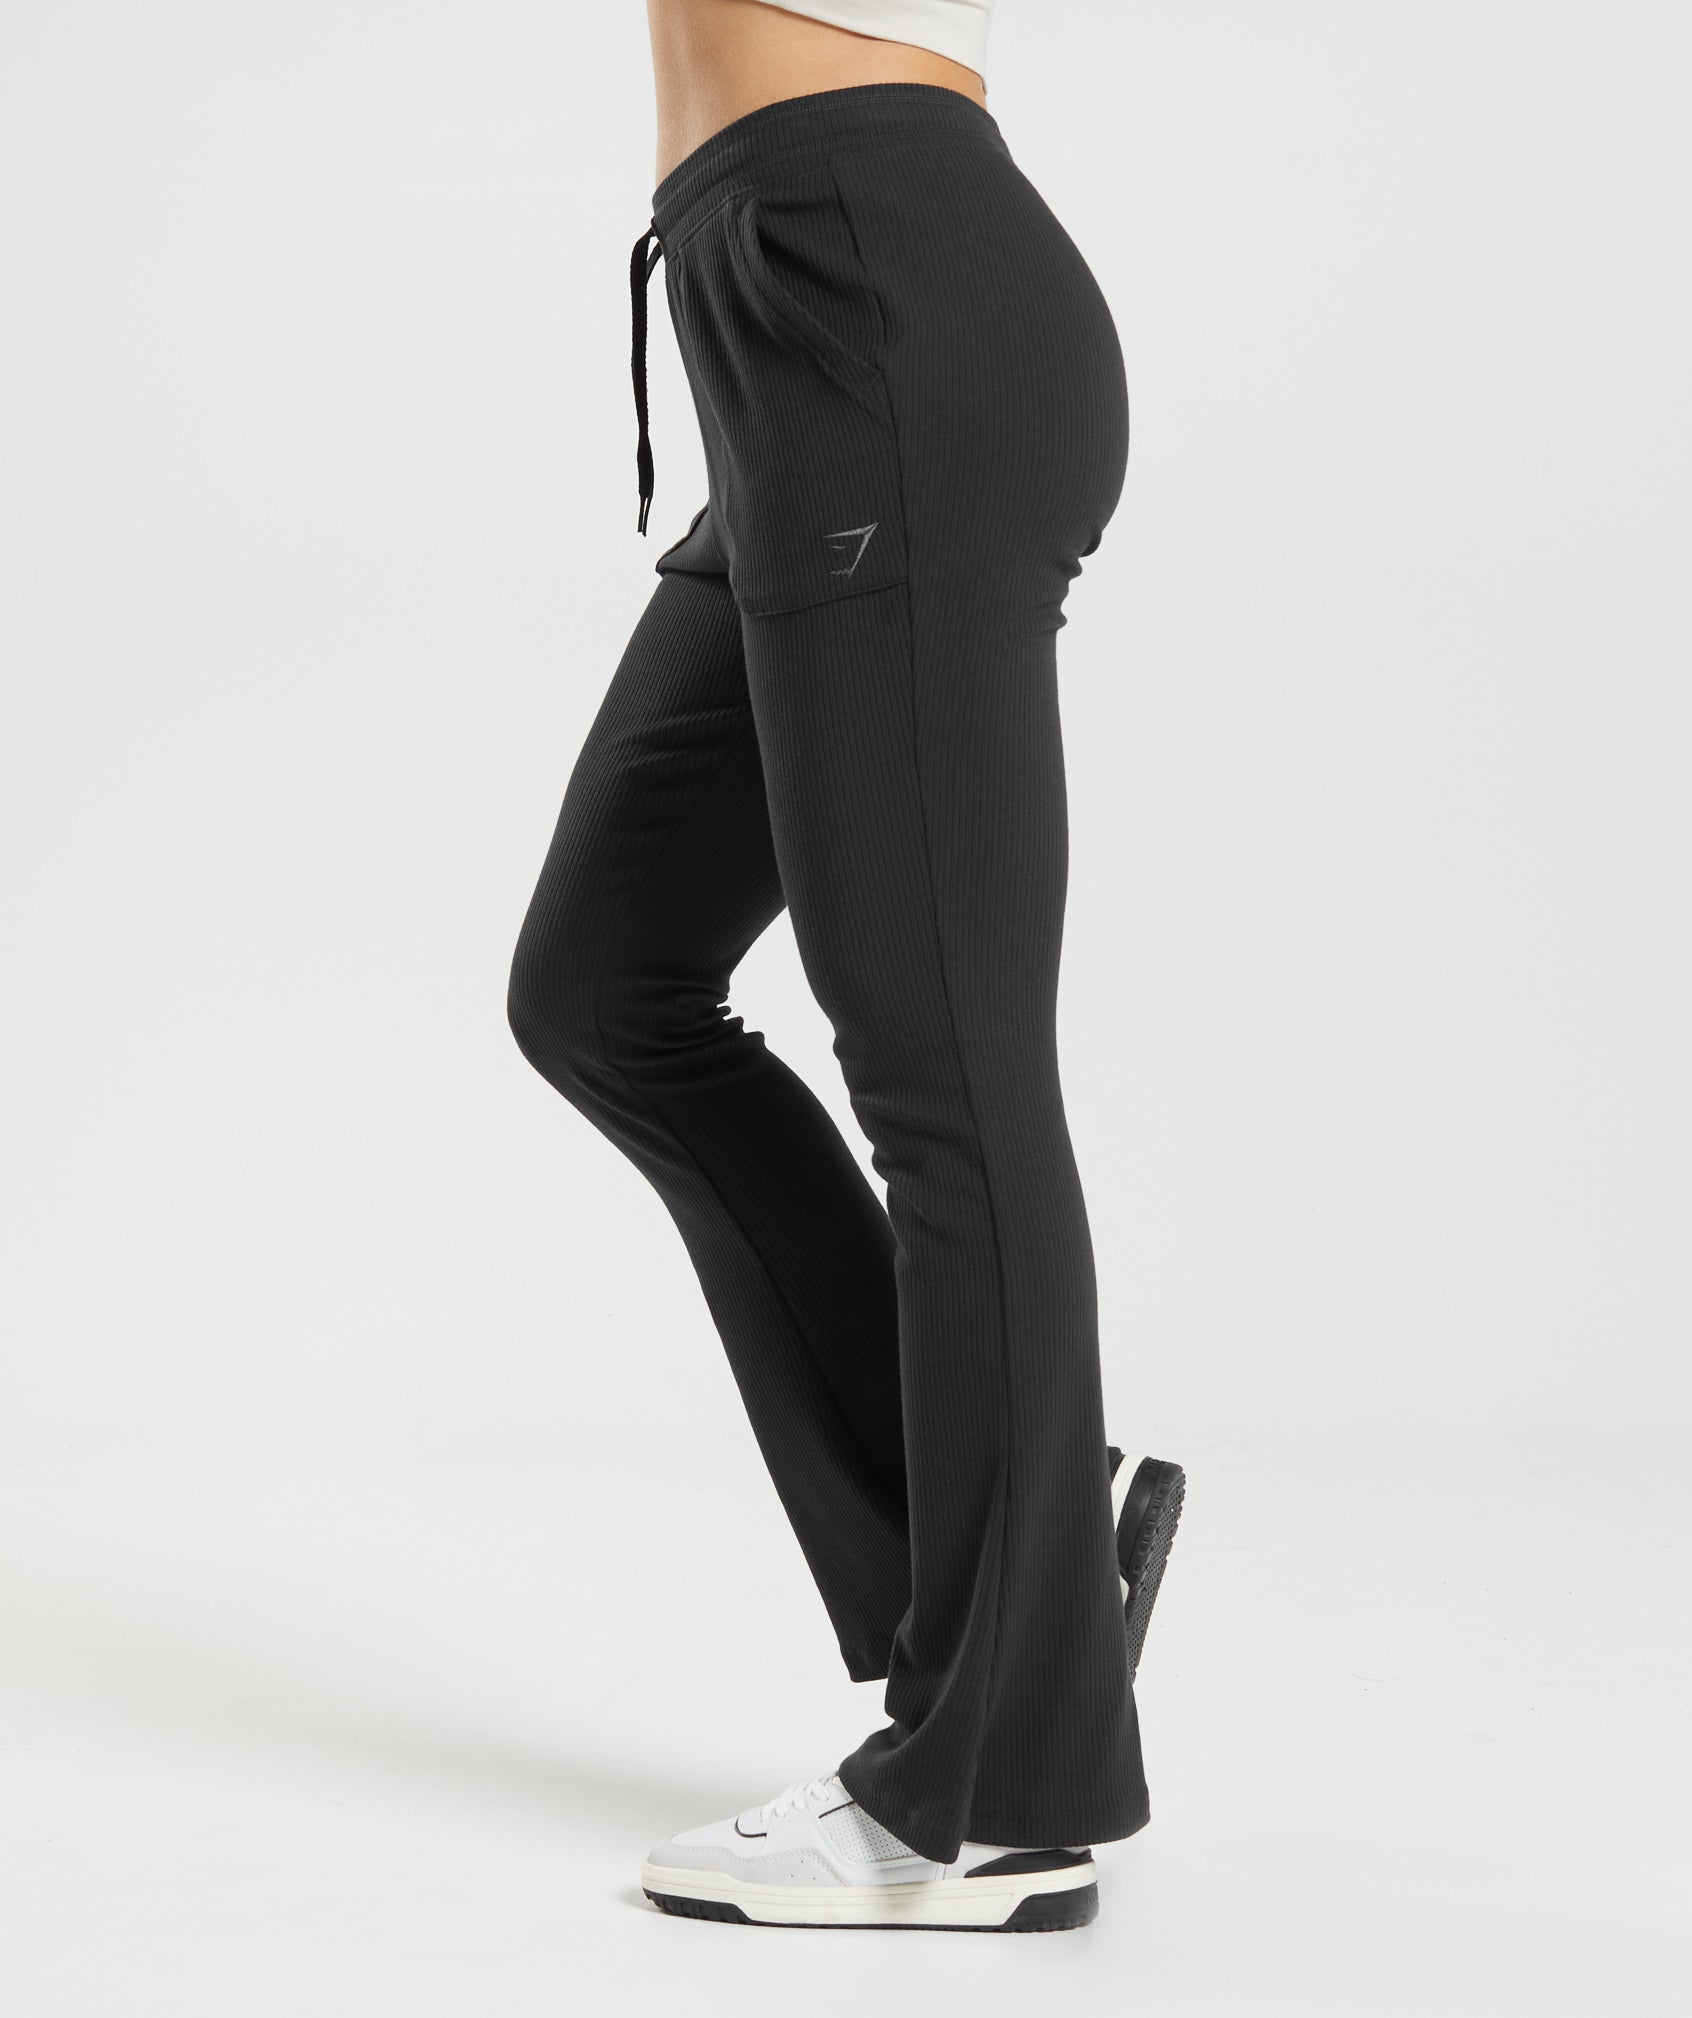 Pause Flared Pants in Black - view 3